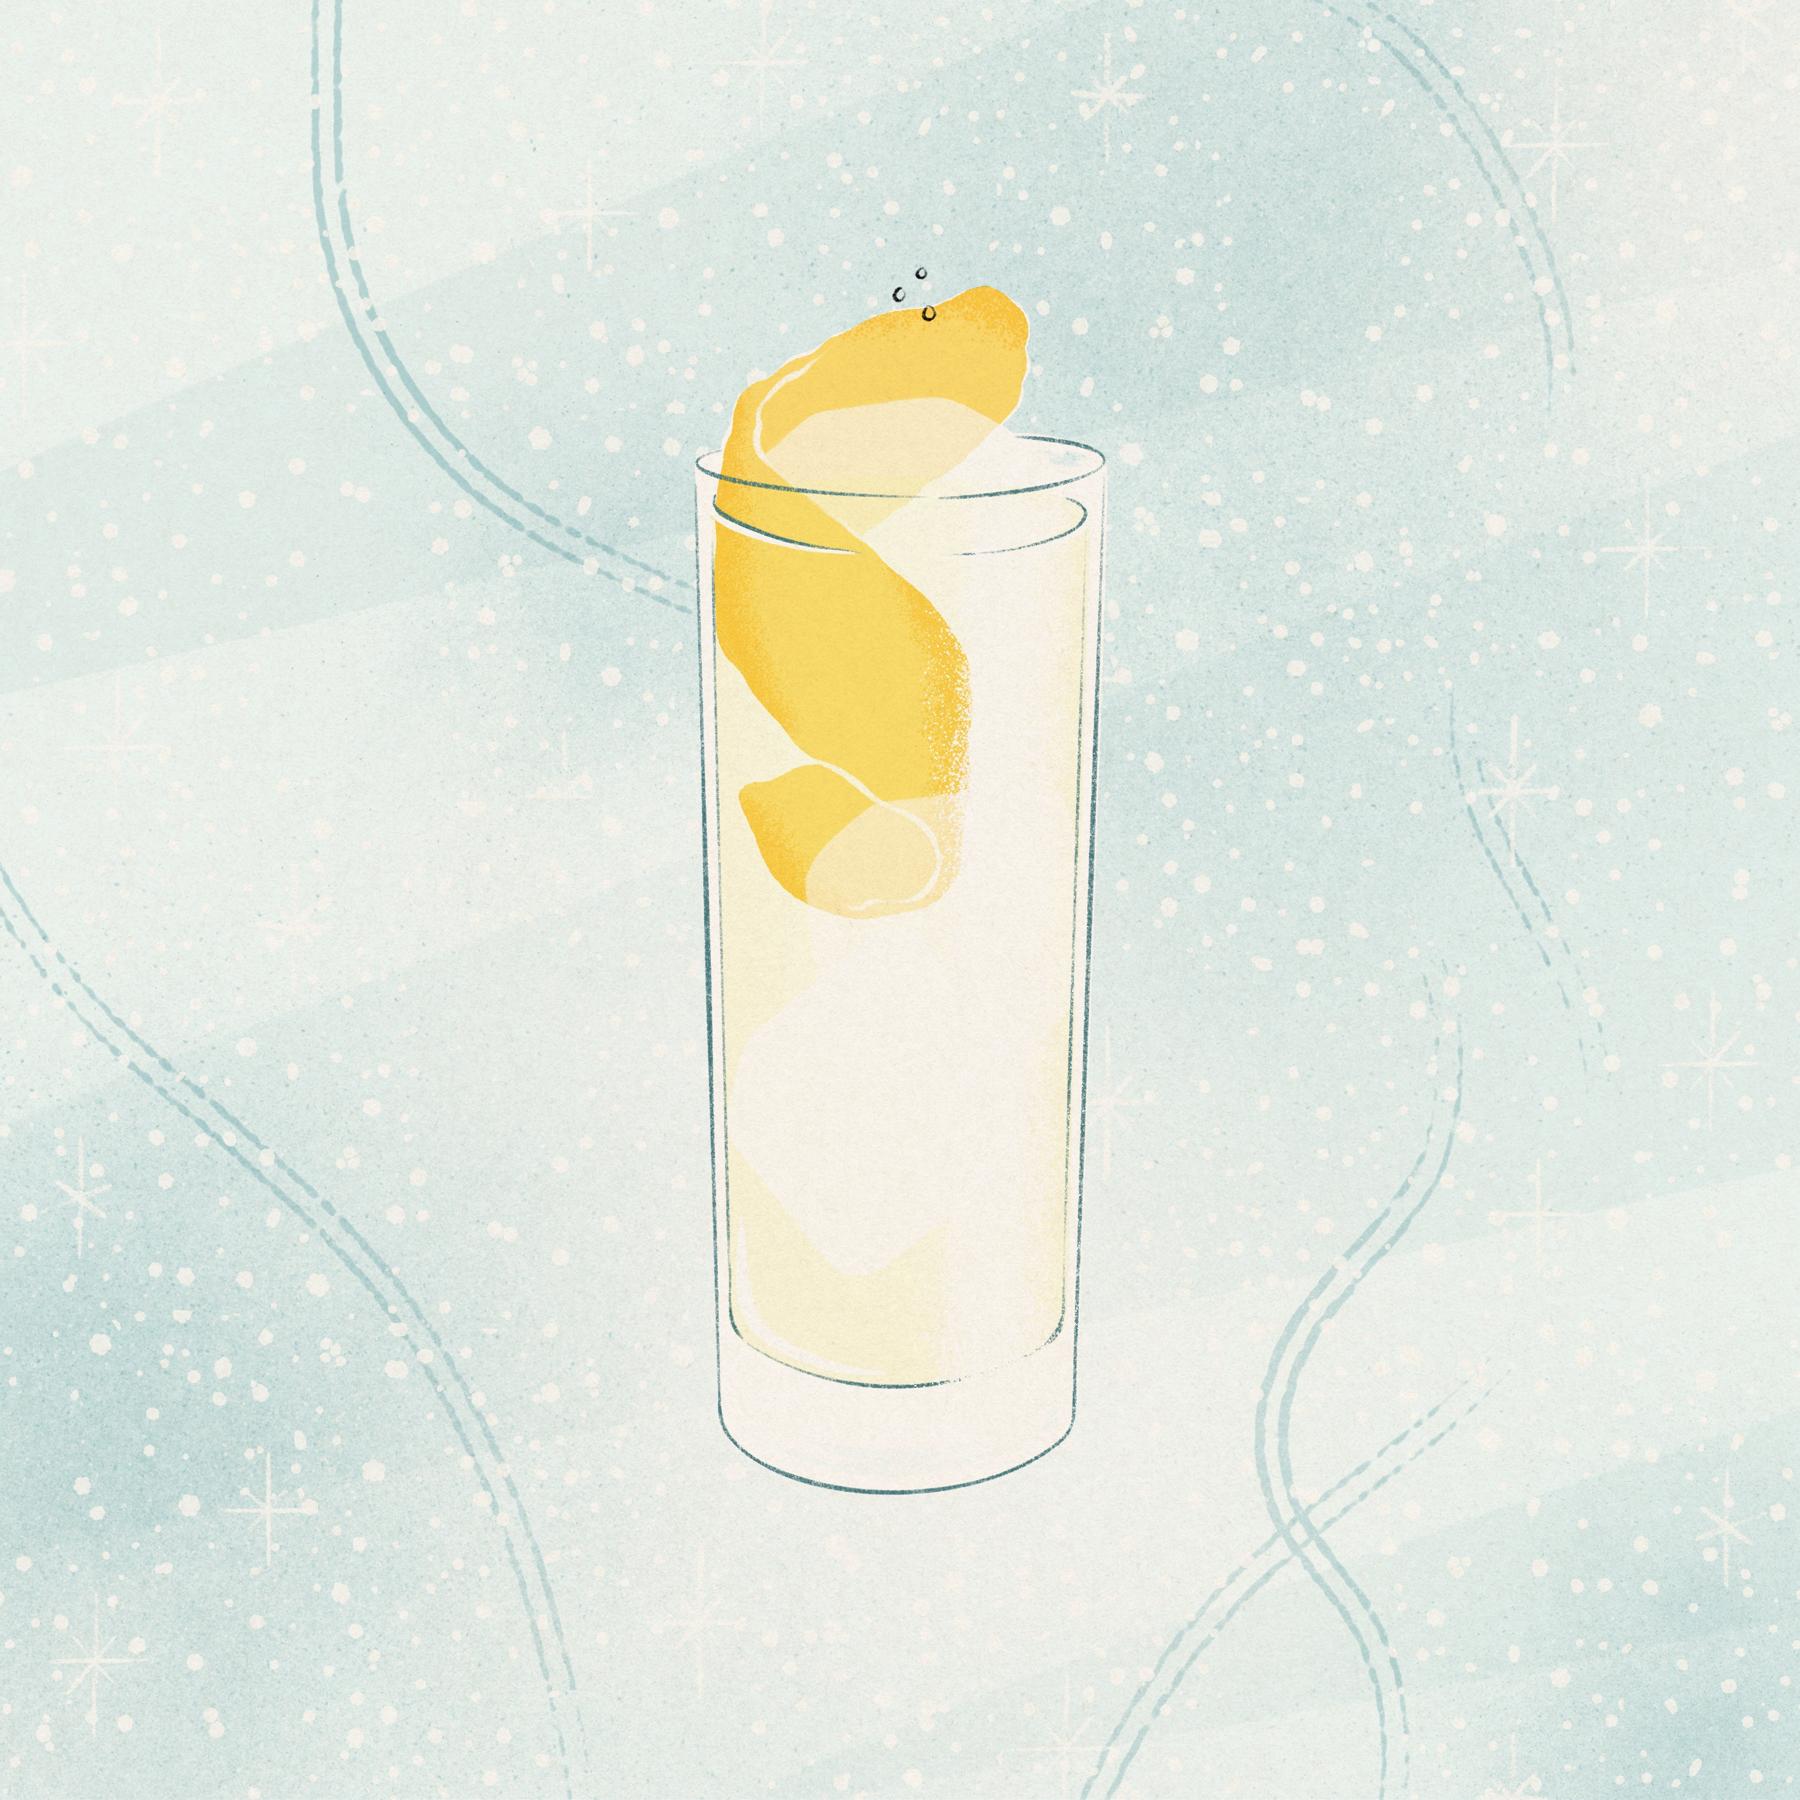 An example of the Après Ski, the mixed drink (drink) featuring Dolin Génépy le Chamois Liqueur, tonic water, and lemon twist; photo by Meghan Albers